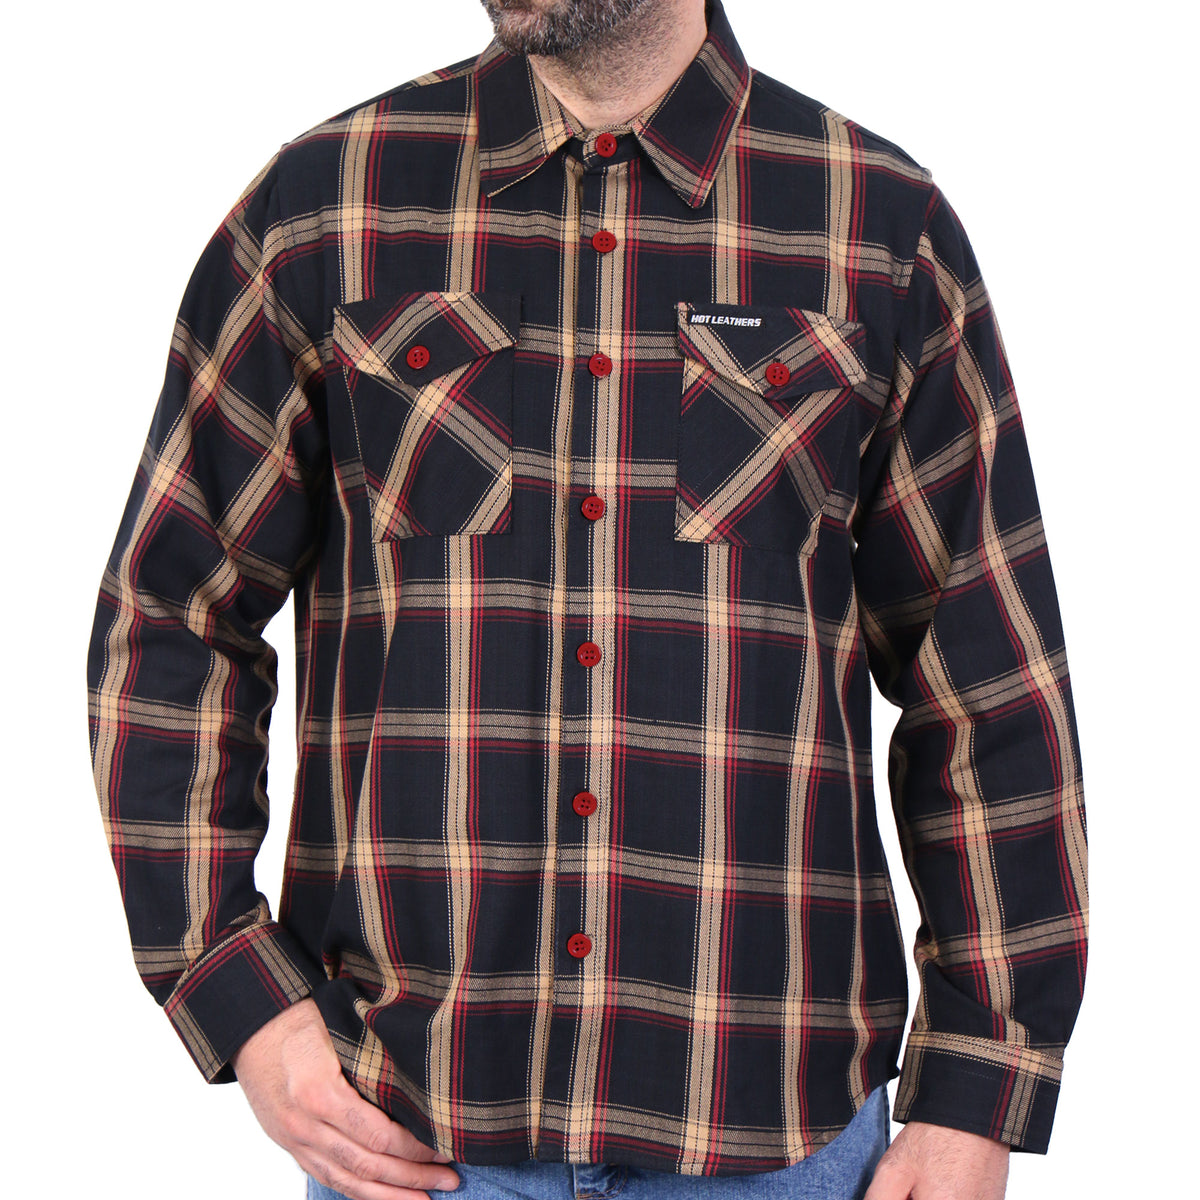 Hot Leathers Black Tan and Red Flannel Shirt